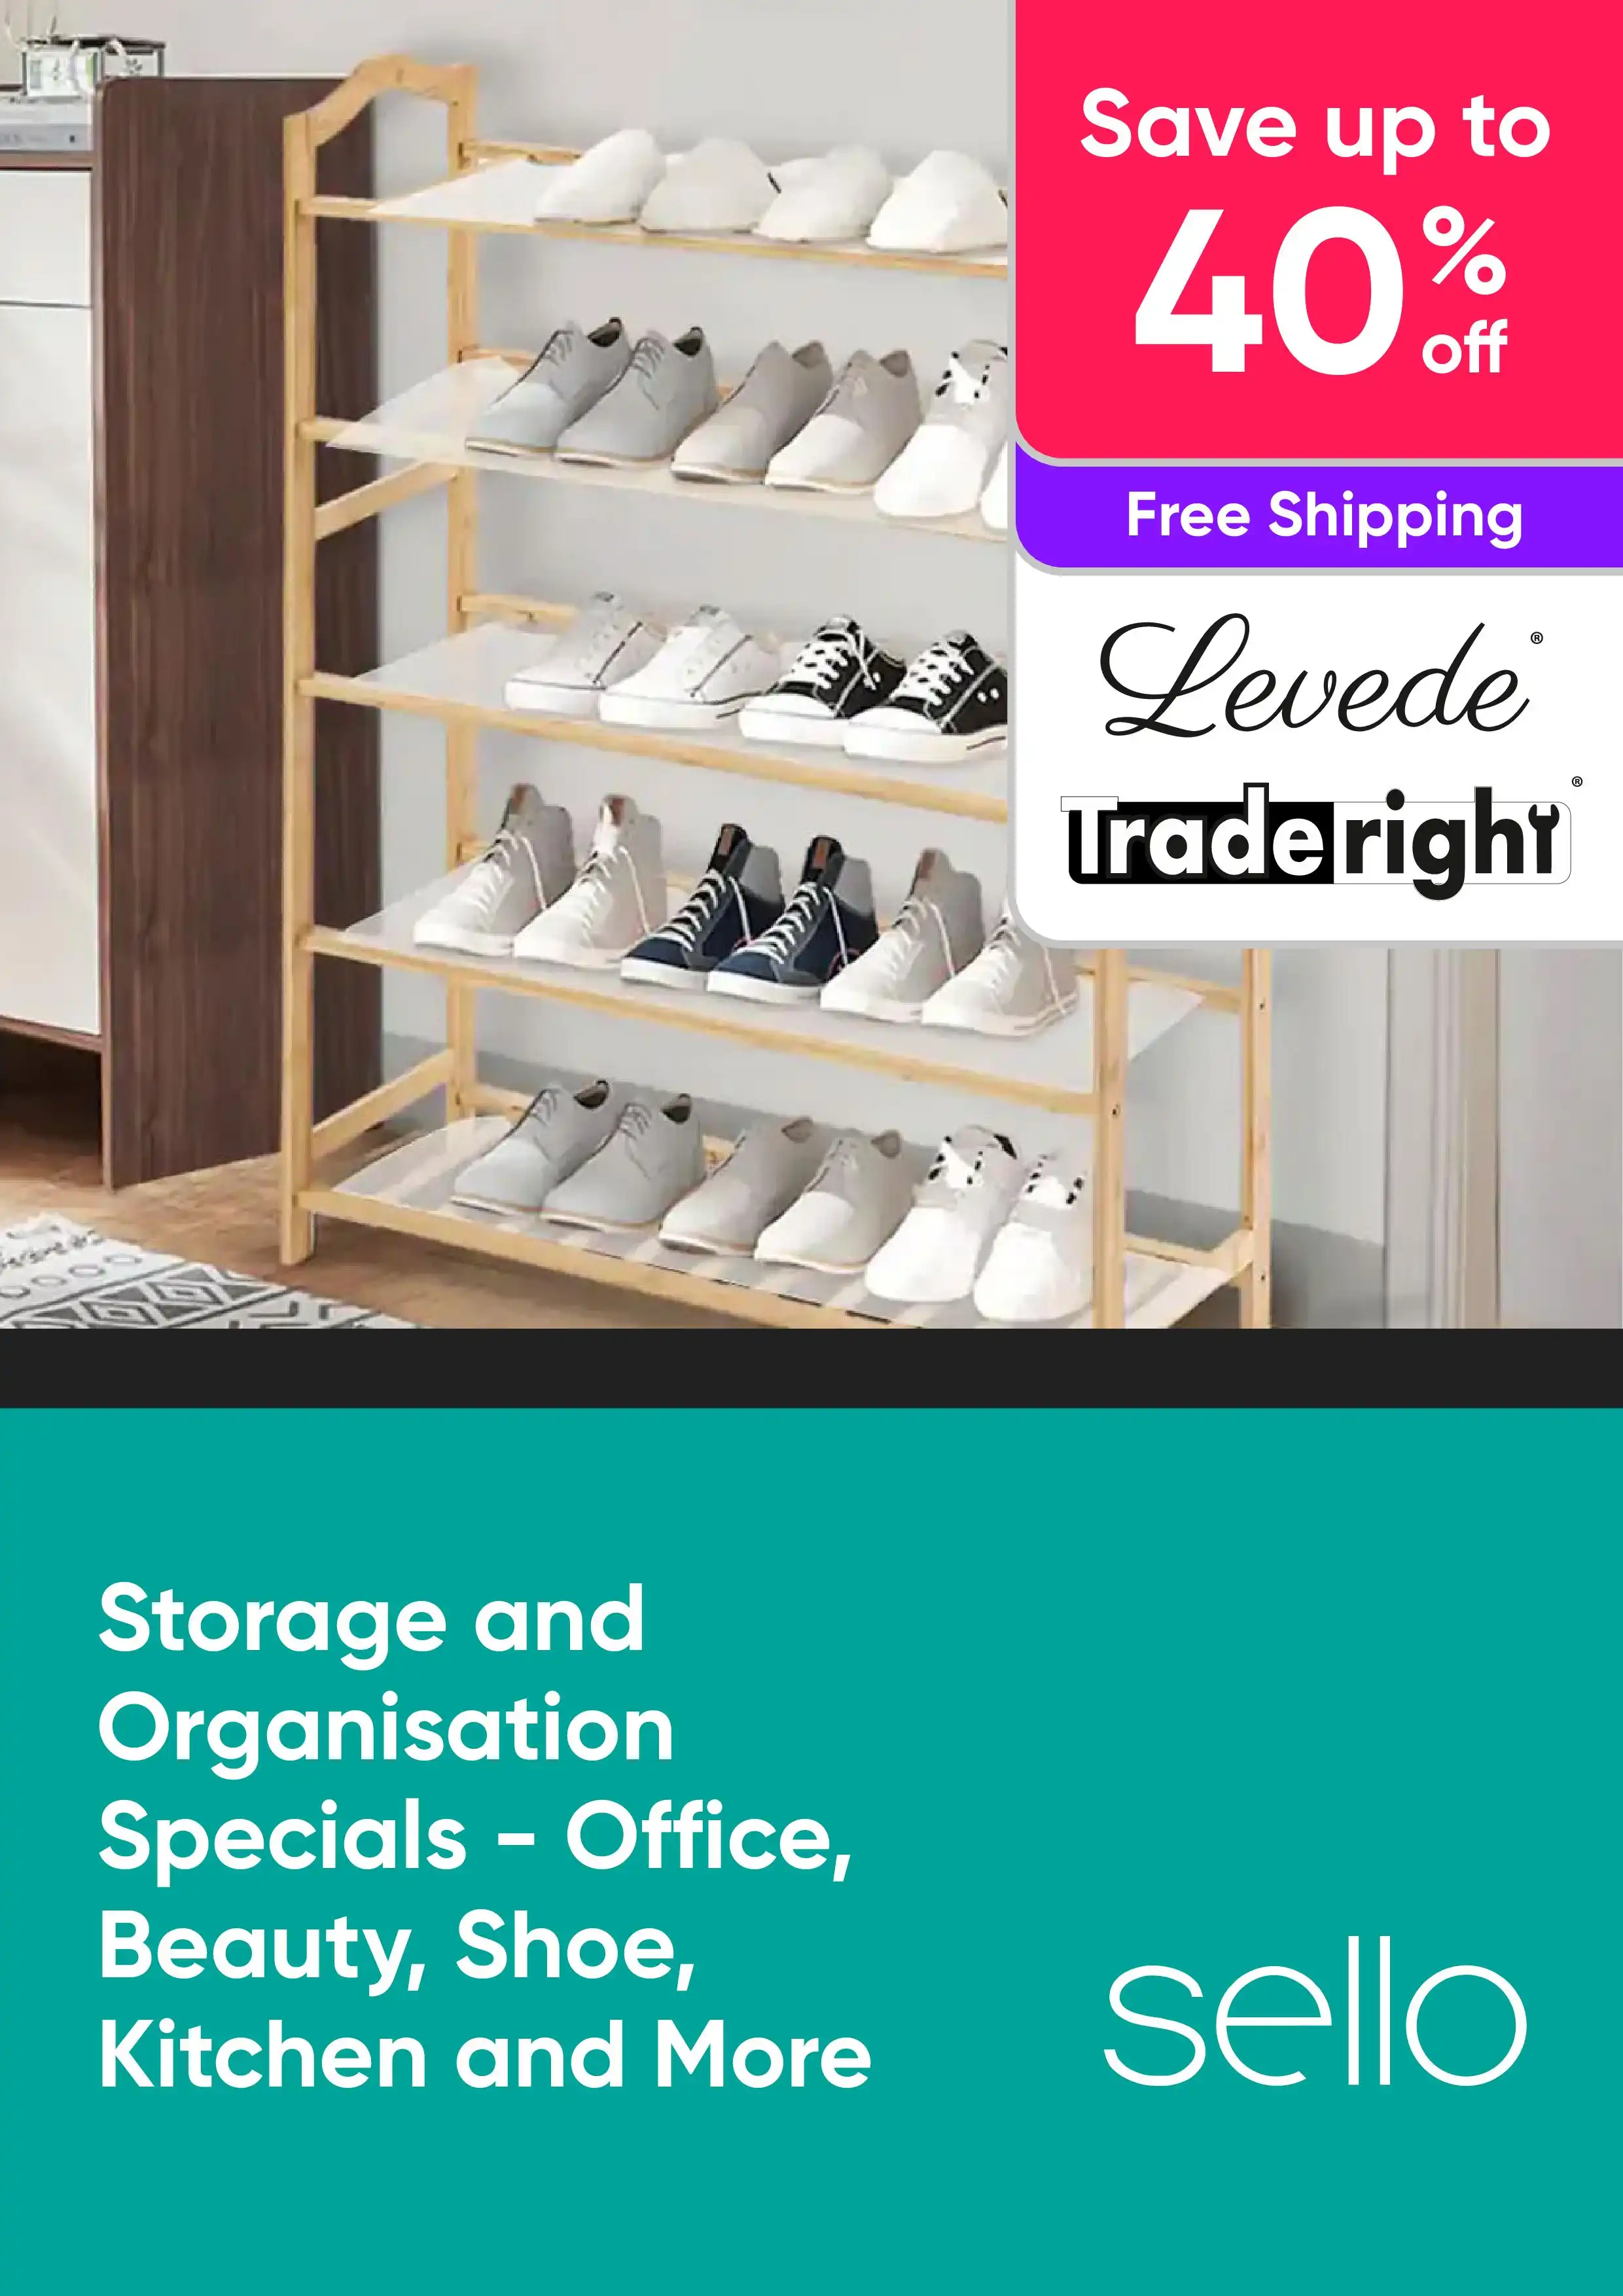 Storage and Organisation Specials - Office, Beauty, Shoe, Kitchen and More - Levede, Traderight - Up to 40% Off